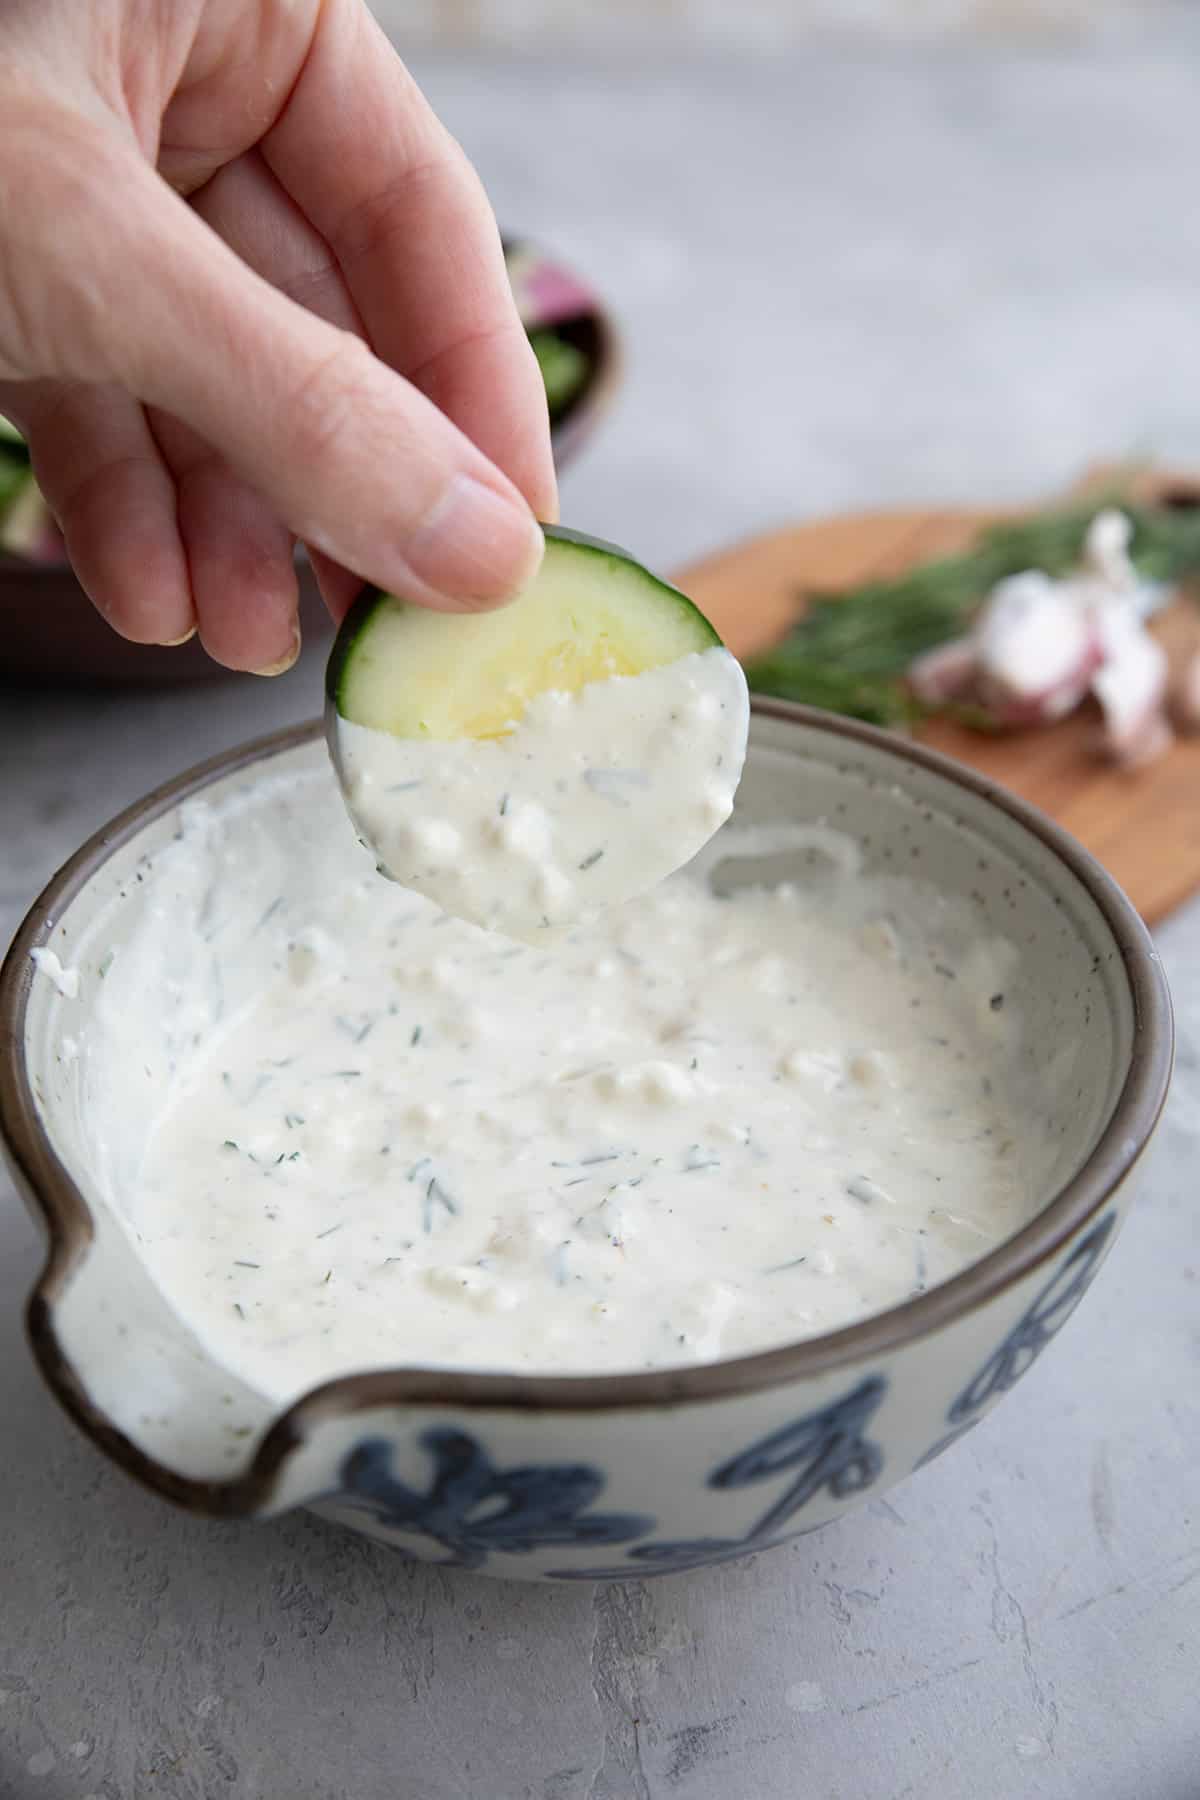 A hand dipping cucumber into Feta Dressing.